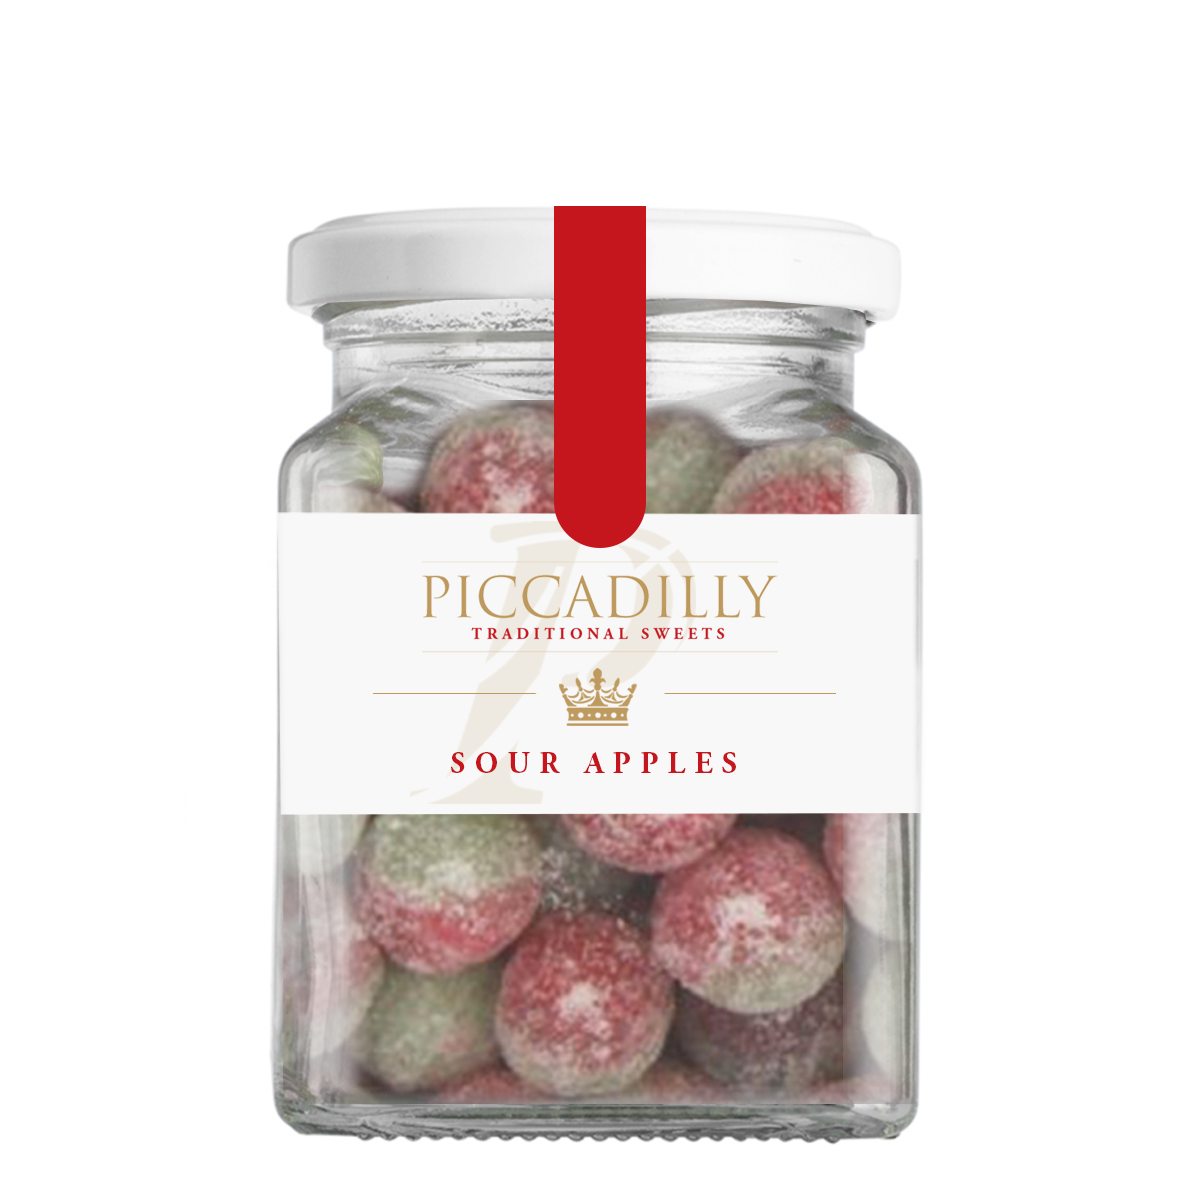 Piccadilly Traditional Sweets Sour Apple 150g